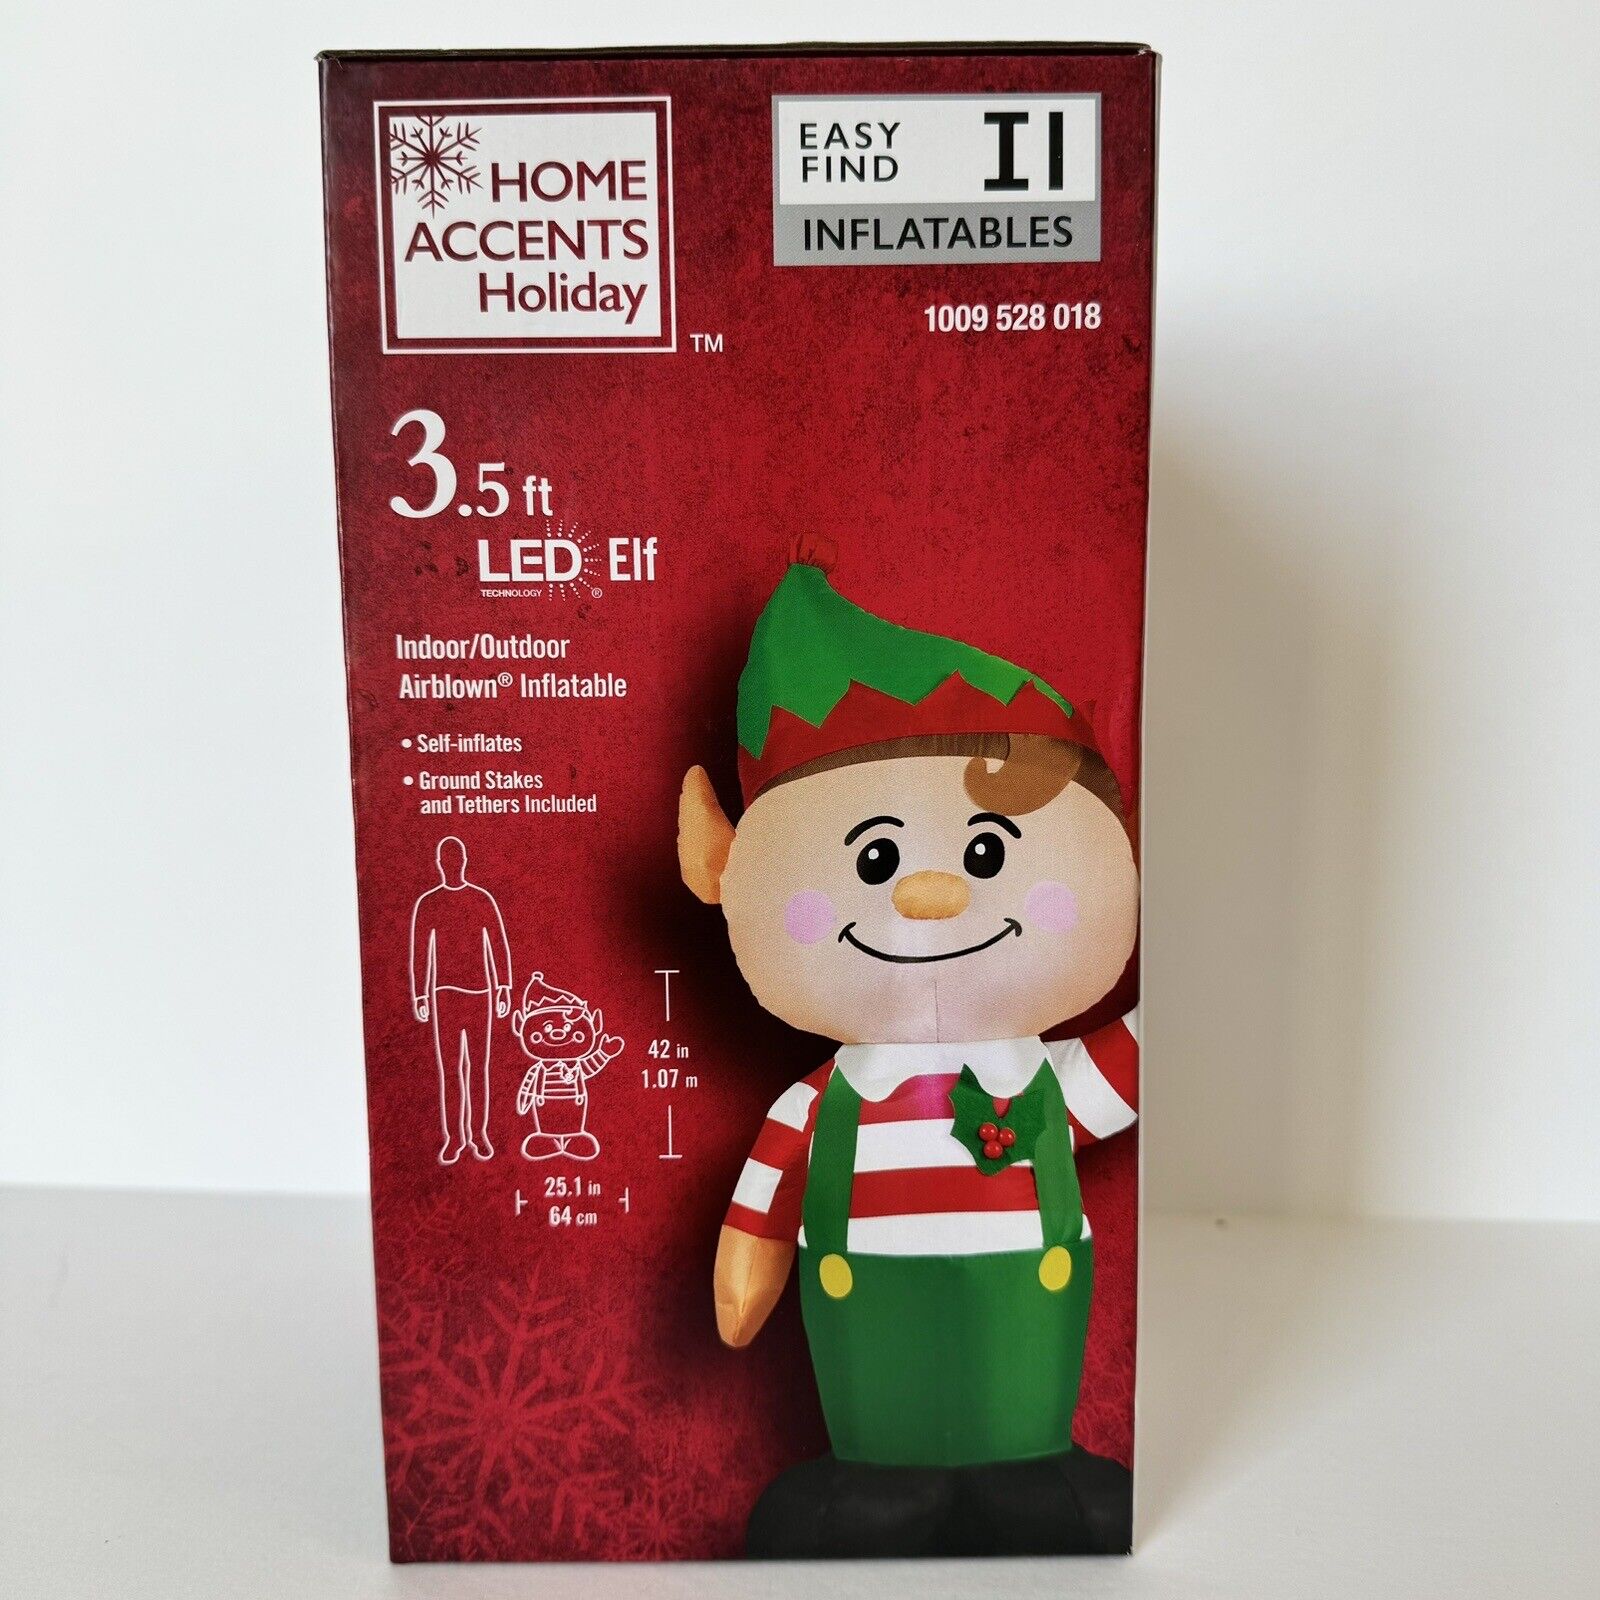 Home Accents Holiday 3.5 ft LED Elf Airblown Inflatable Christmas Decoration NEW